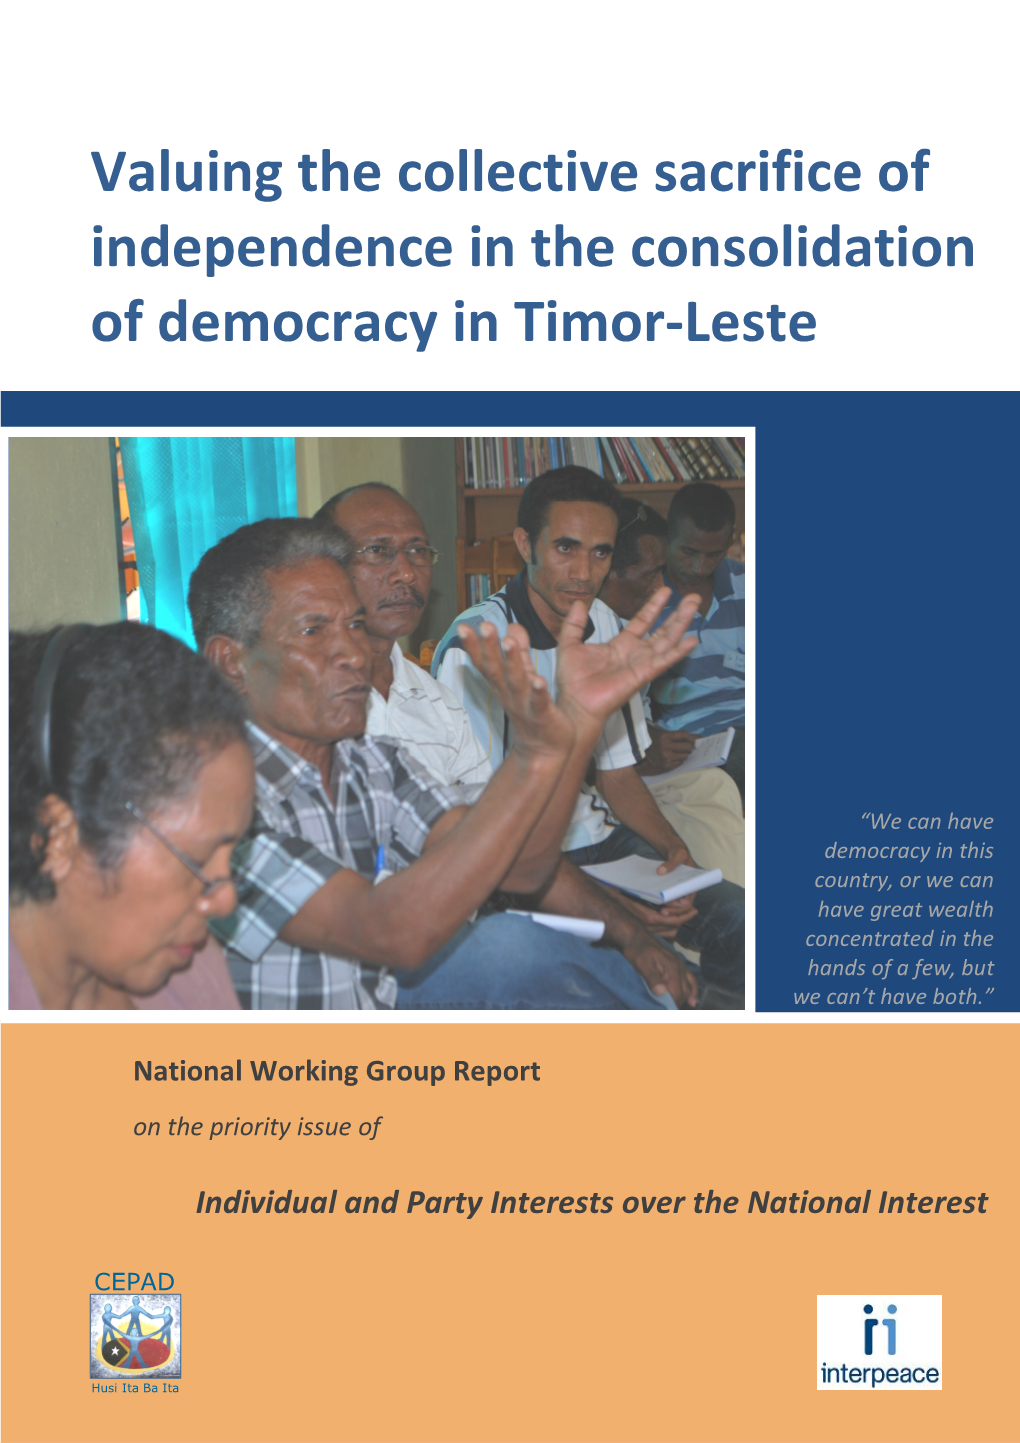 Valuing the Collective Sacrifice of Independence in the Consolidation of Democracy in Timor-Leste